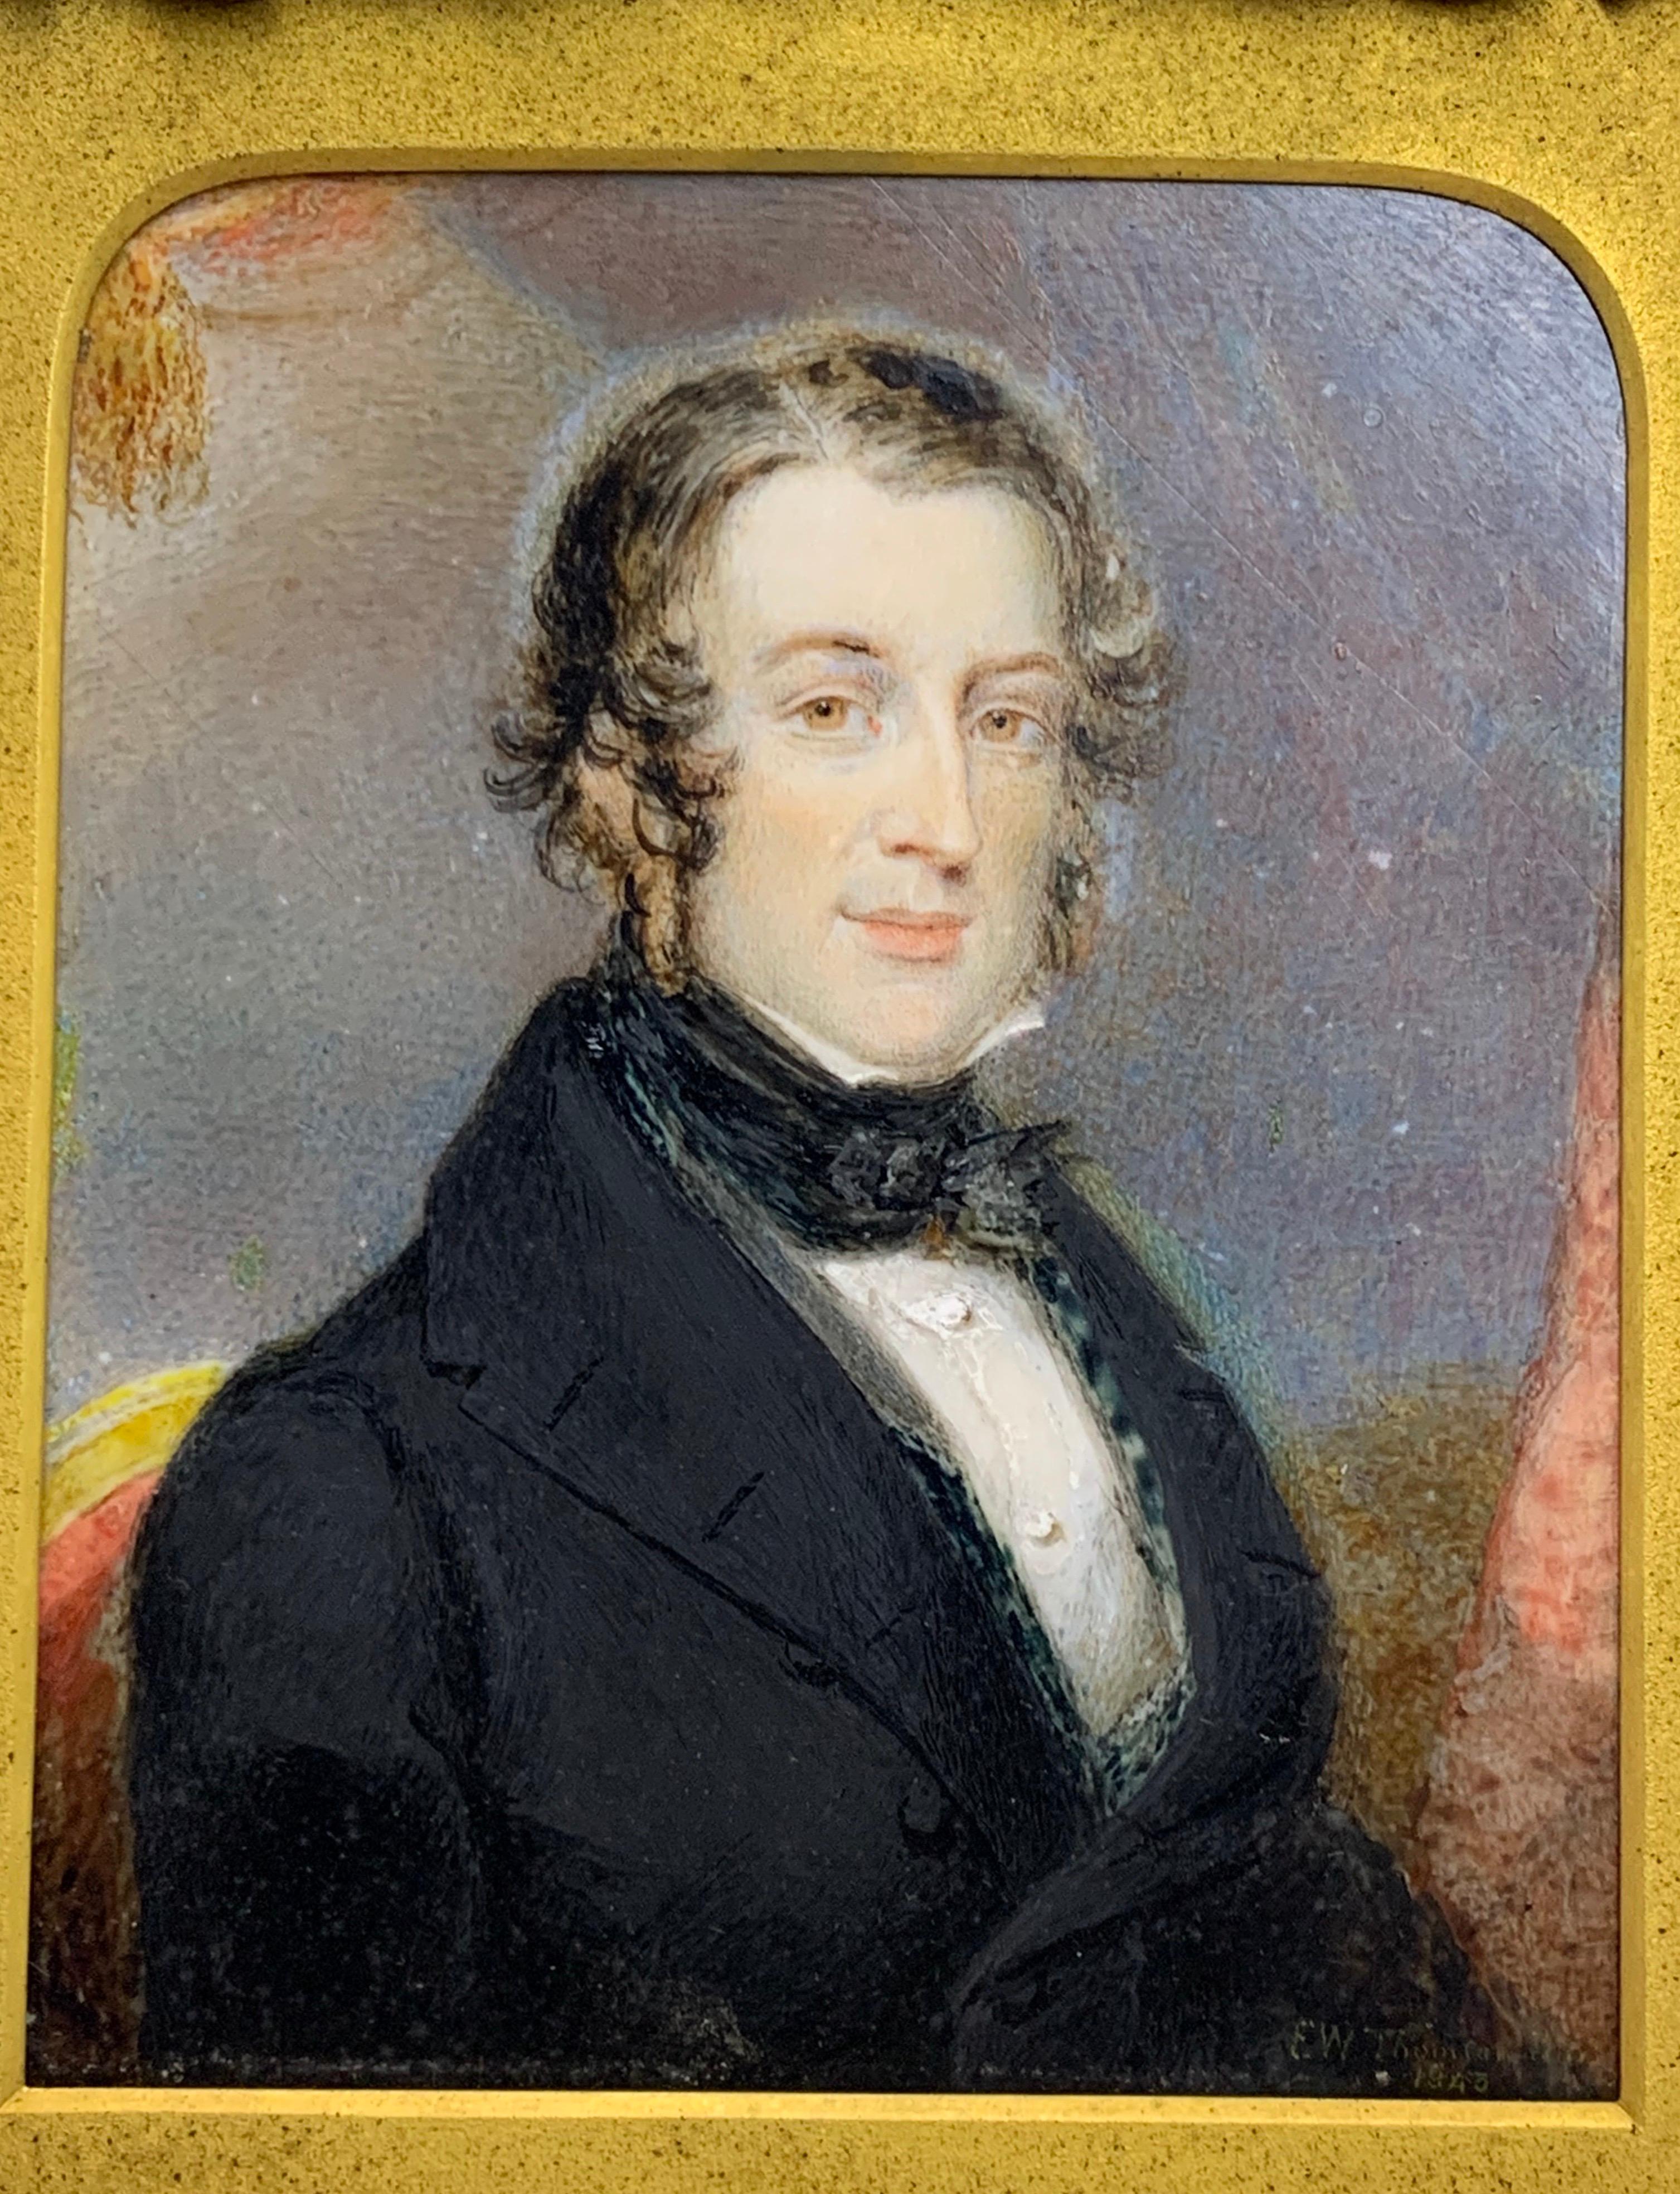 A Portrait miniatures of a gentleman, seated wearing black in a Victorian interior.
This is a Watercolour that has been well painted, by Edward William Thomson (1770-1847) signed and dated E W Thomson Pinx. 1845 lower right, This is presented in